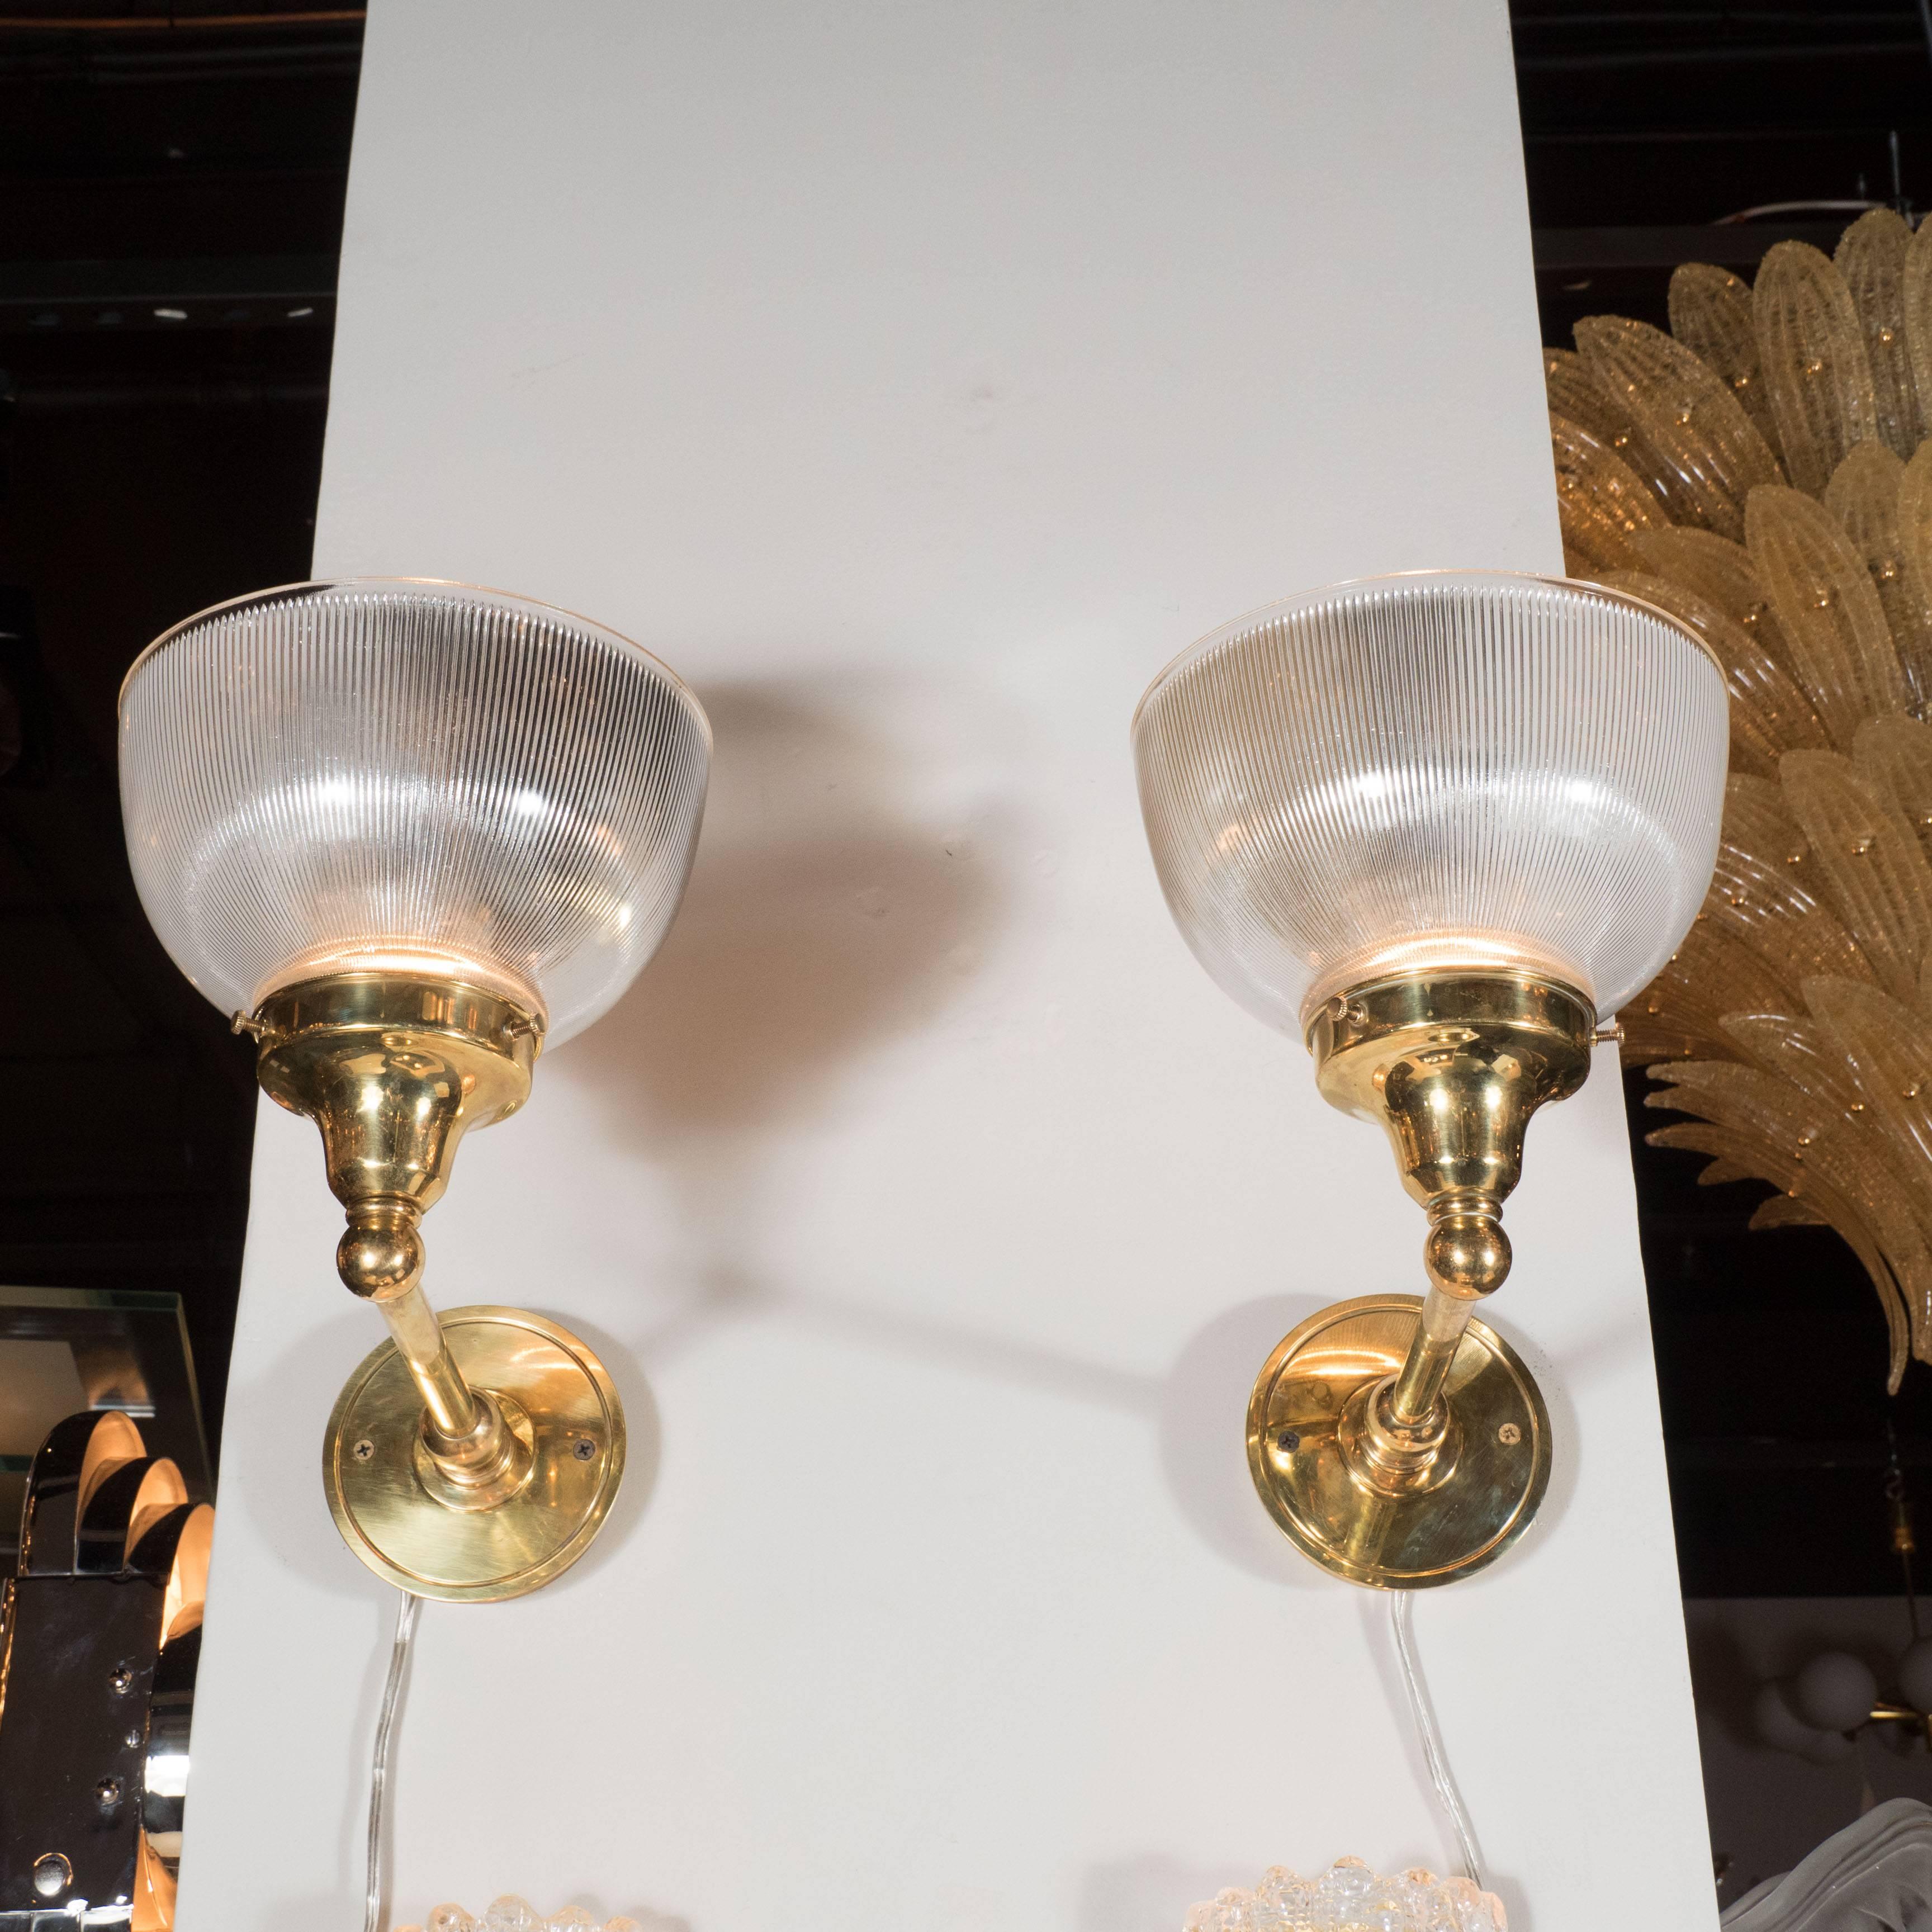 These wonderful set of four sconces feature a reverse domed ribbed halothane glass shade with a polished brass arm with classical detailing. They have been newly rewired and are in excellent condition.